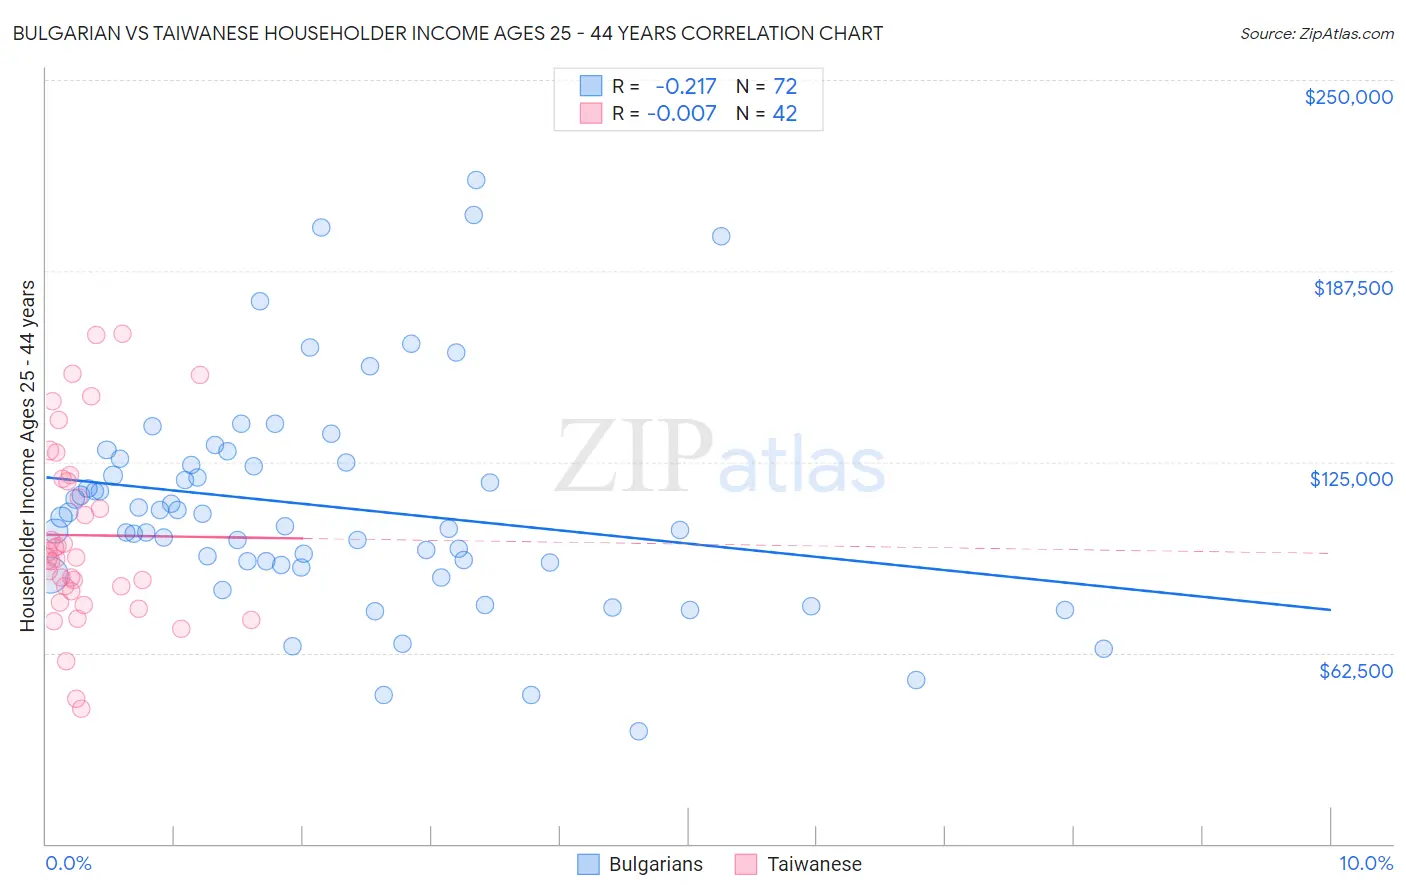 Bulgarian vs Taiwanese Householder Income Ages 25 - 44 years